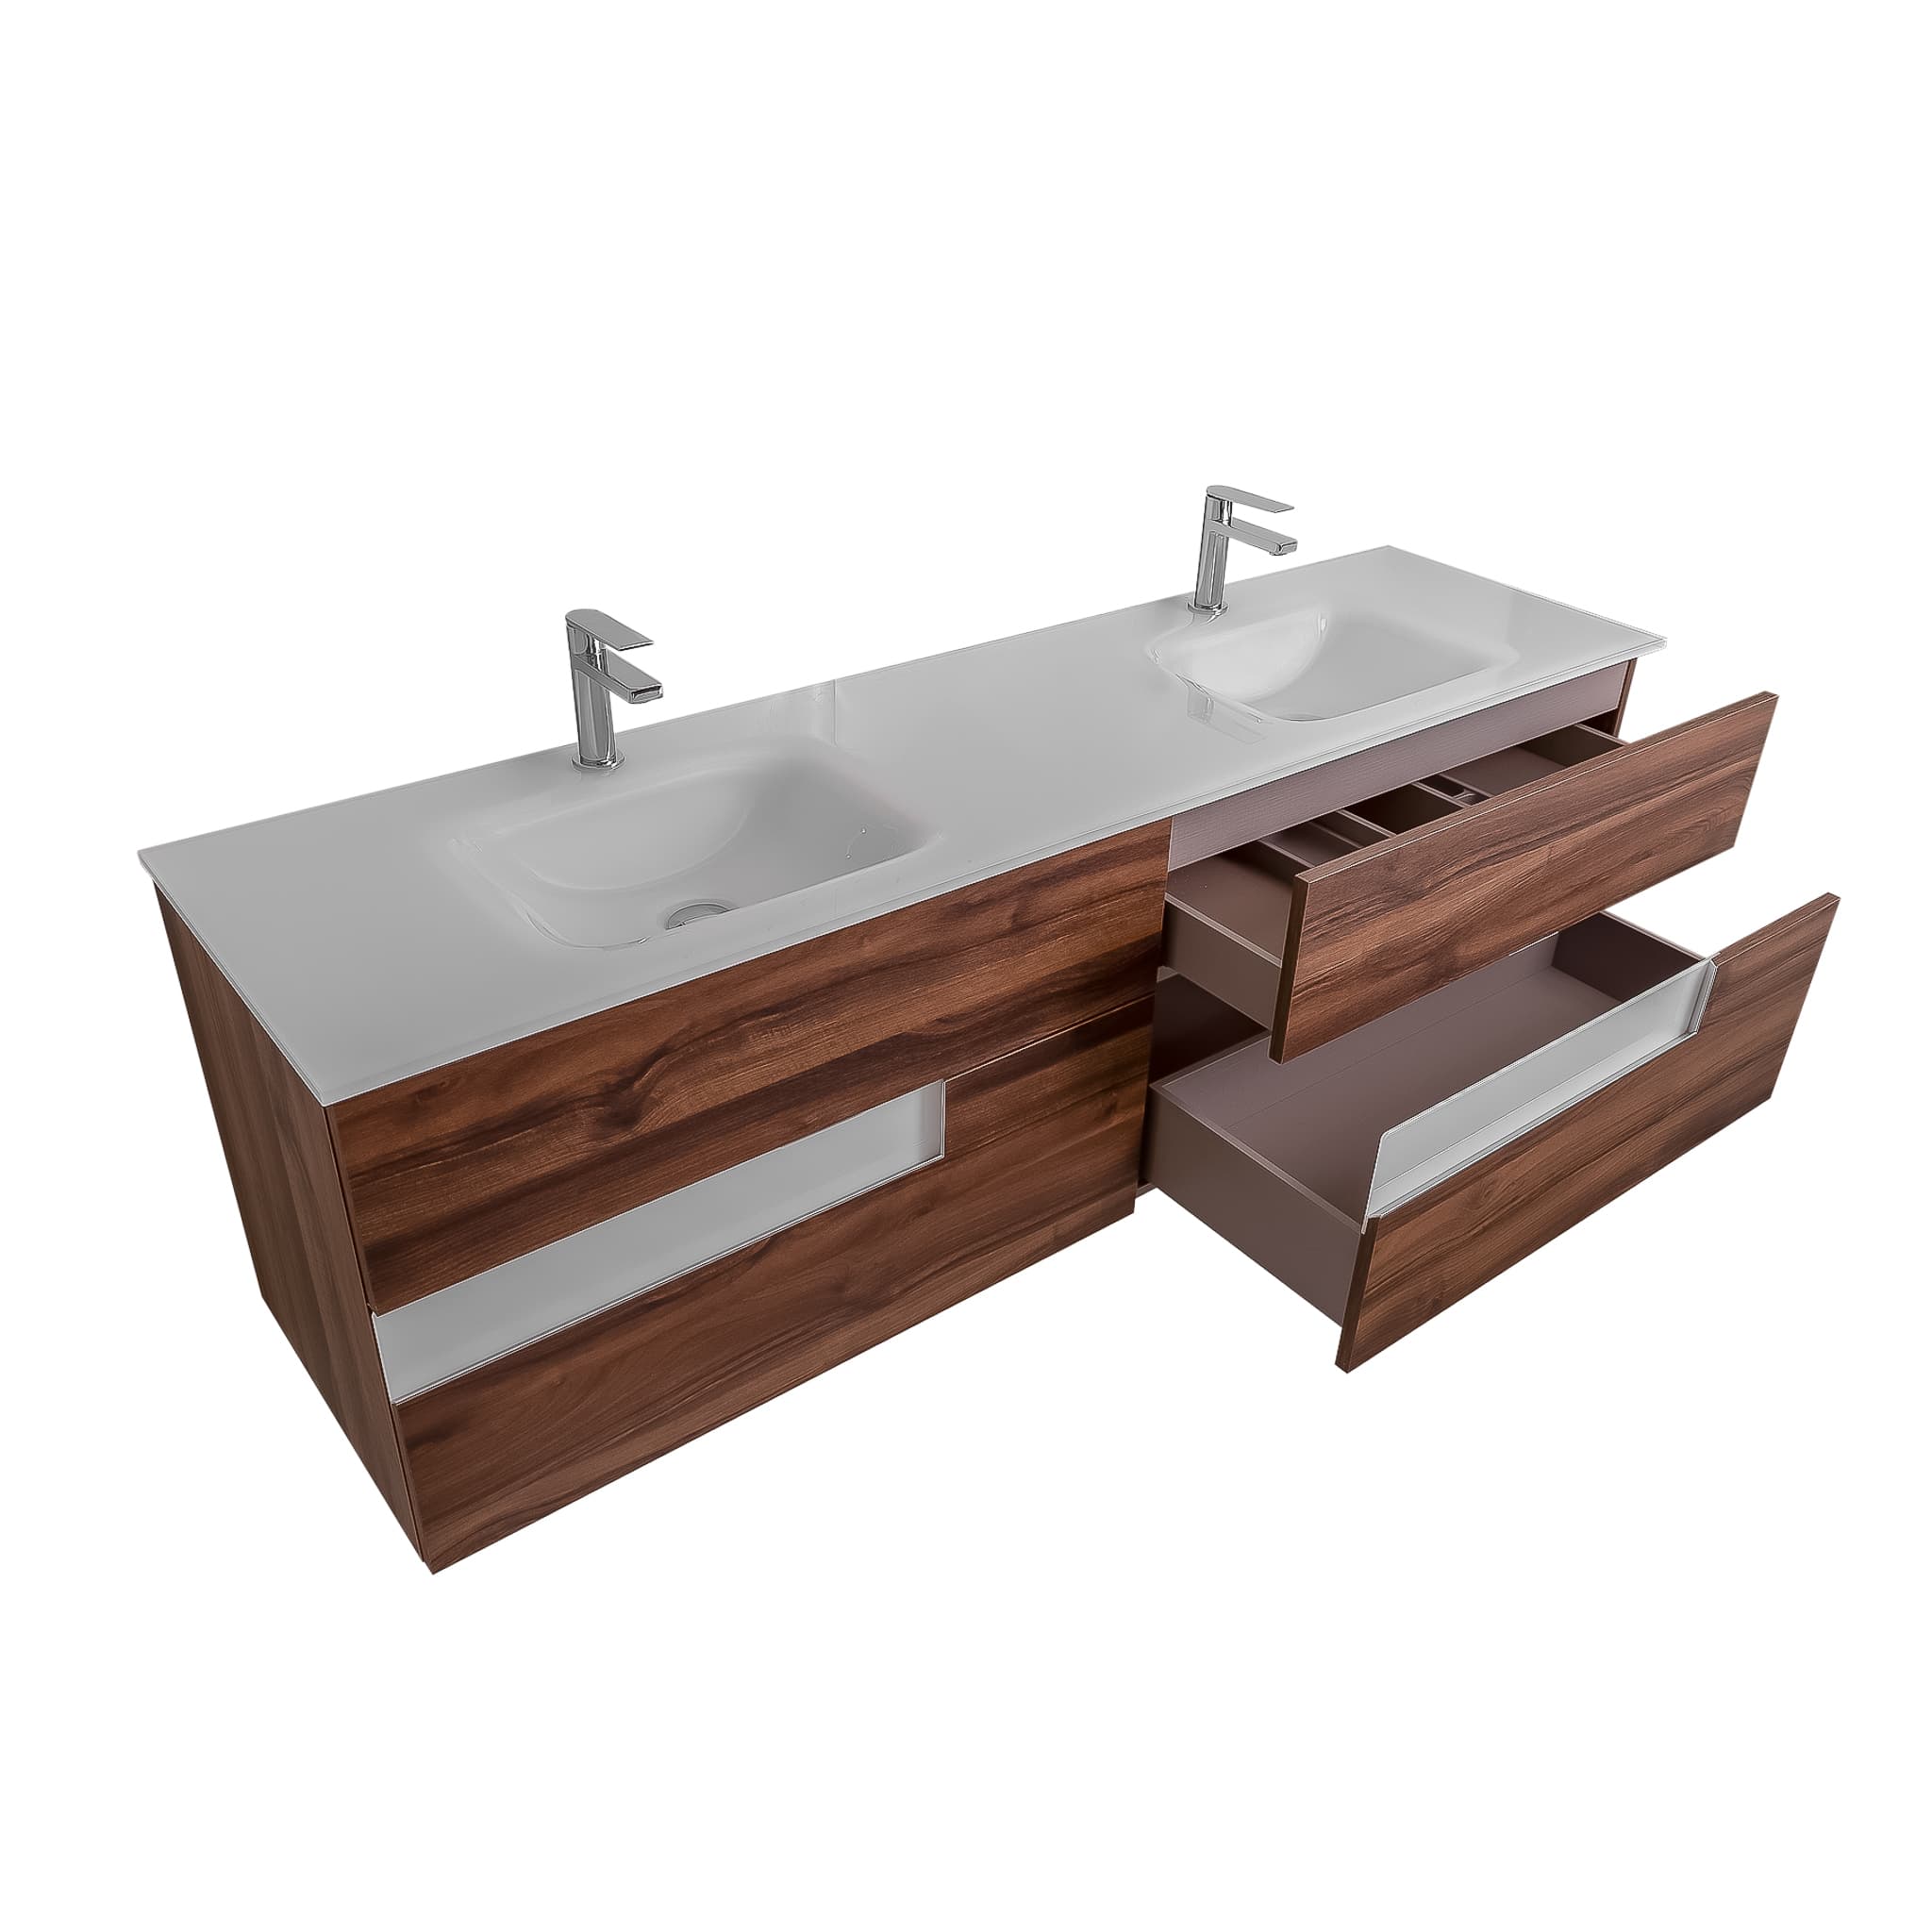 Vision 63 Valenti Medium Brown Wood Cabinet, White Tempered Glass Double Sink, Wall Mounted Modern Vanity Set